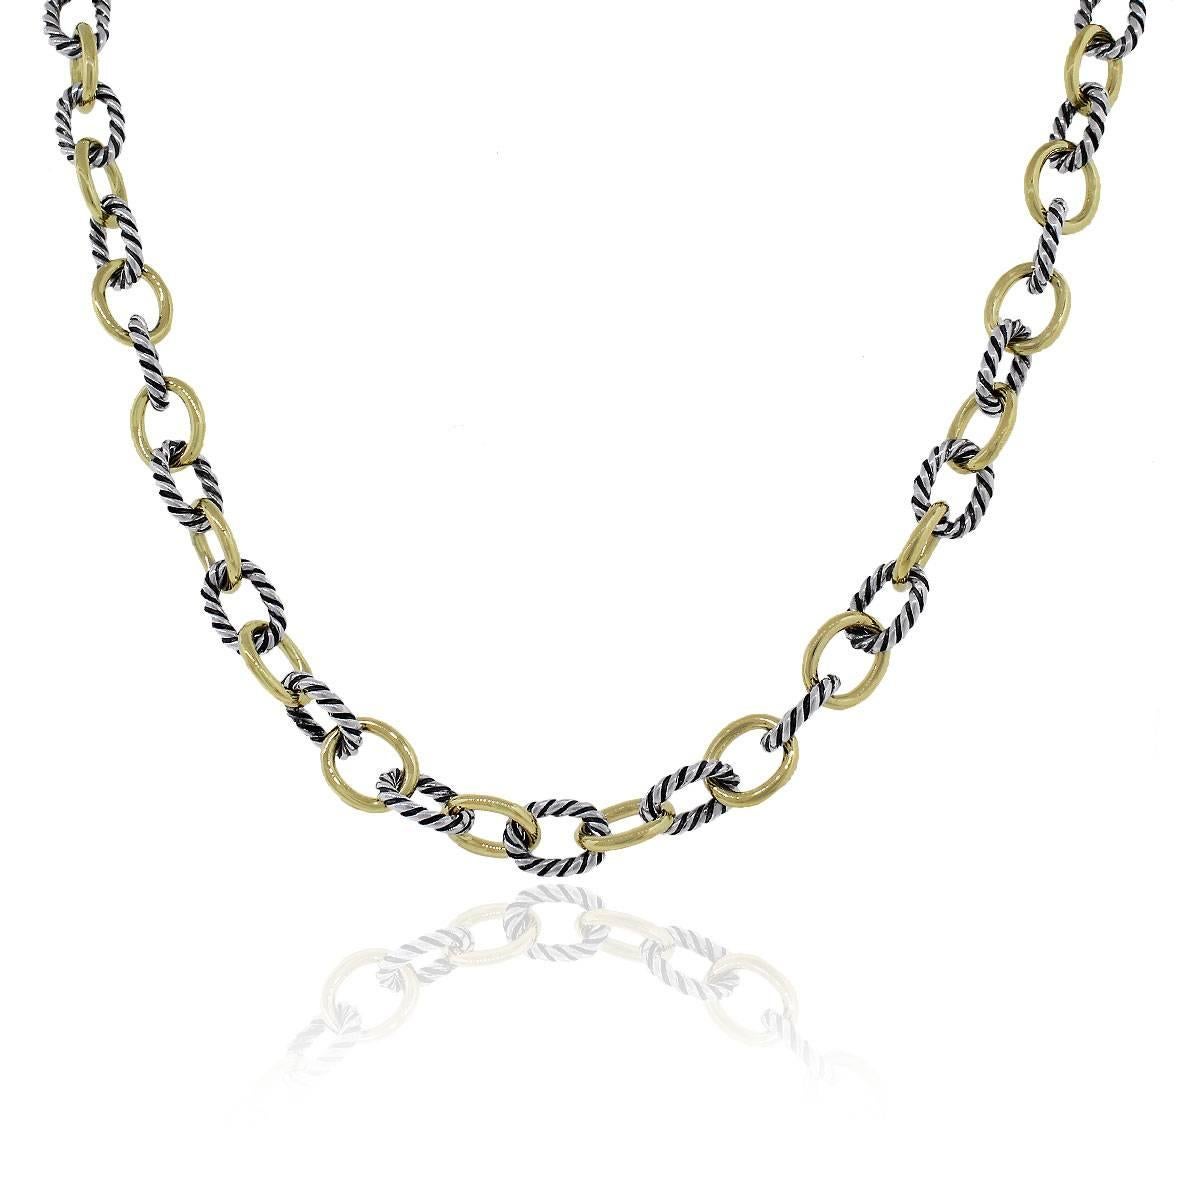 Material: Sterling silver and 18k yellow gold
Necklace Measurements: 18″
Clasp: Lobster claw
Total Weight: 54.7g (35.1dwt)
SKU: G7127